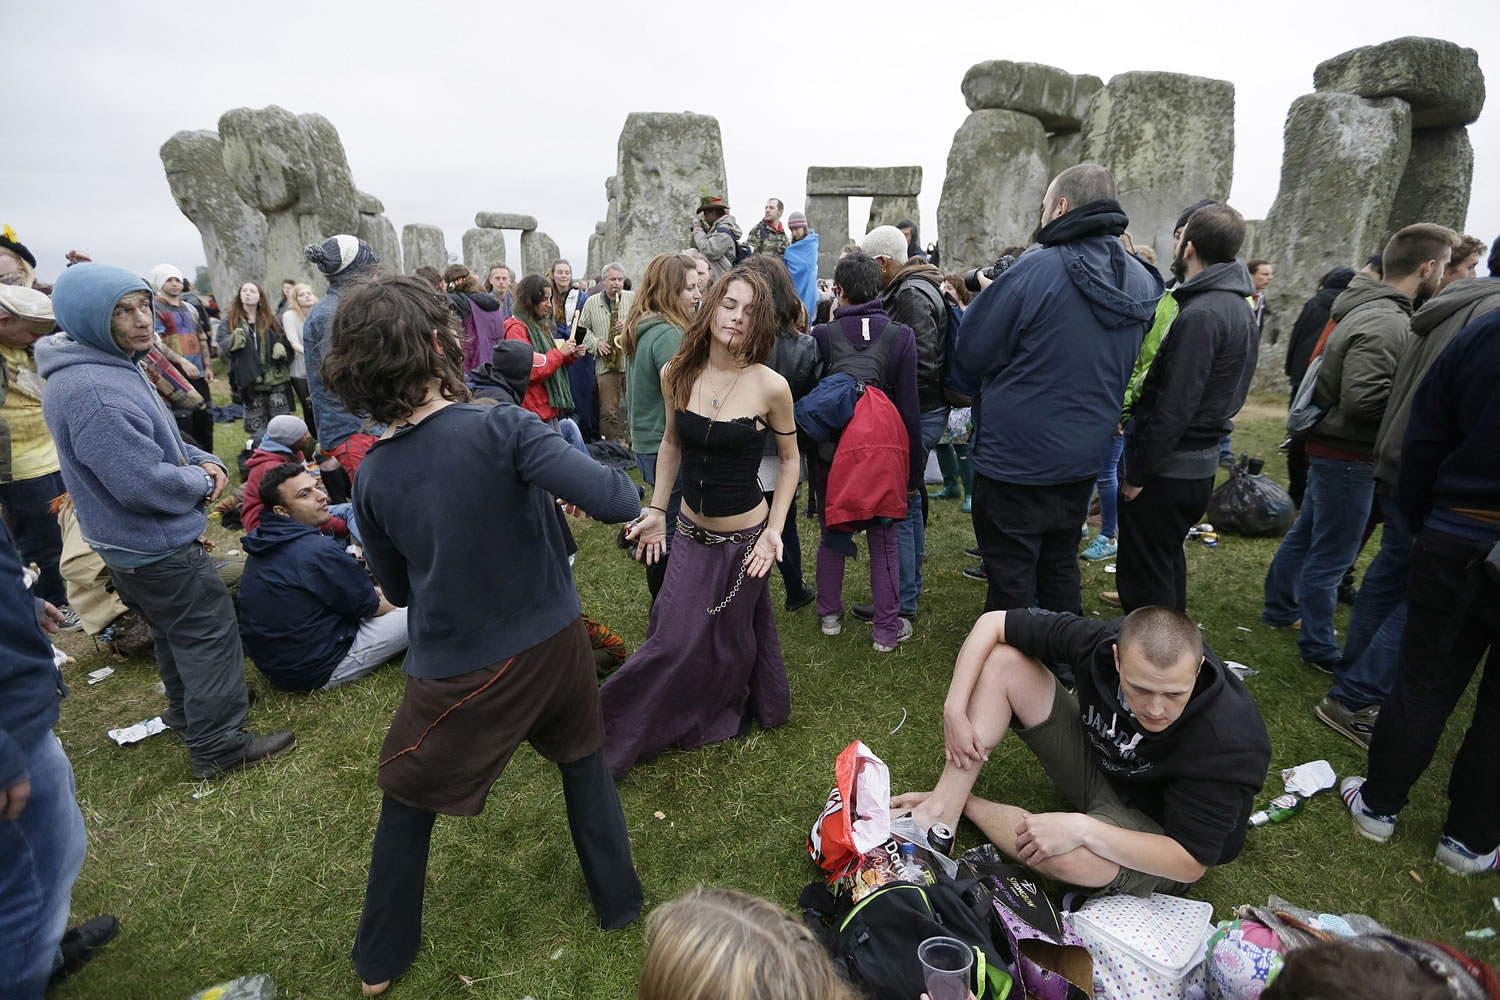 People dance as thousands of revelers gathered Sunday at the ancient stone circle Stonehenge to celebrate the summer solstice, the longest day of the year, near Salisbury, England.